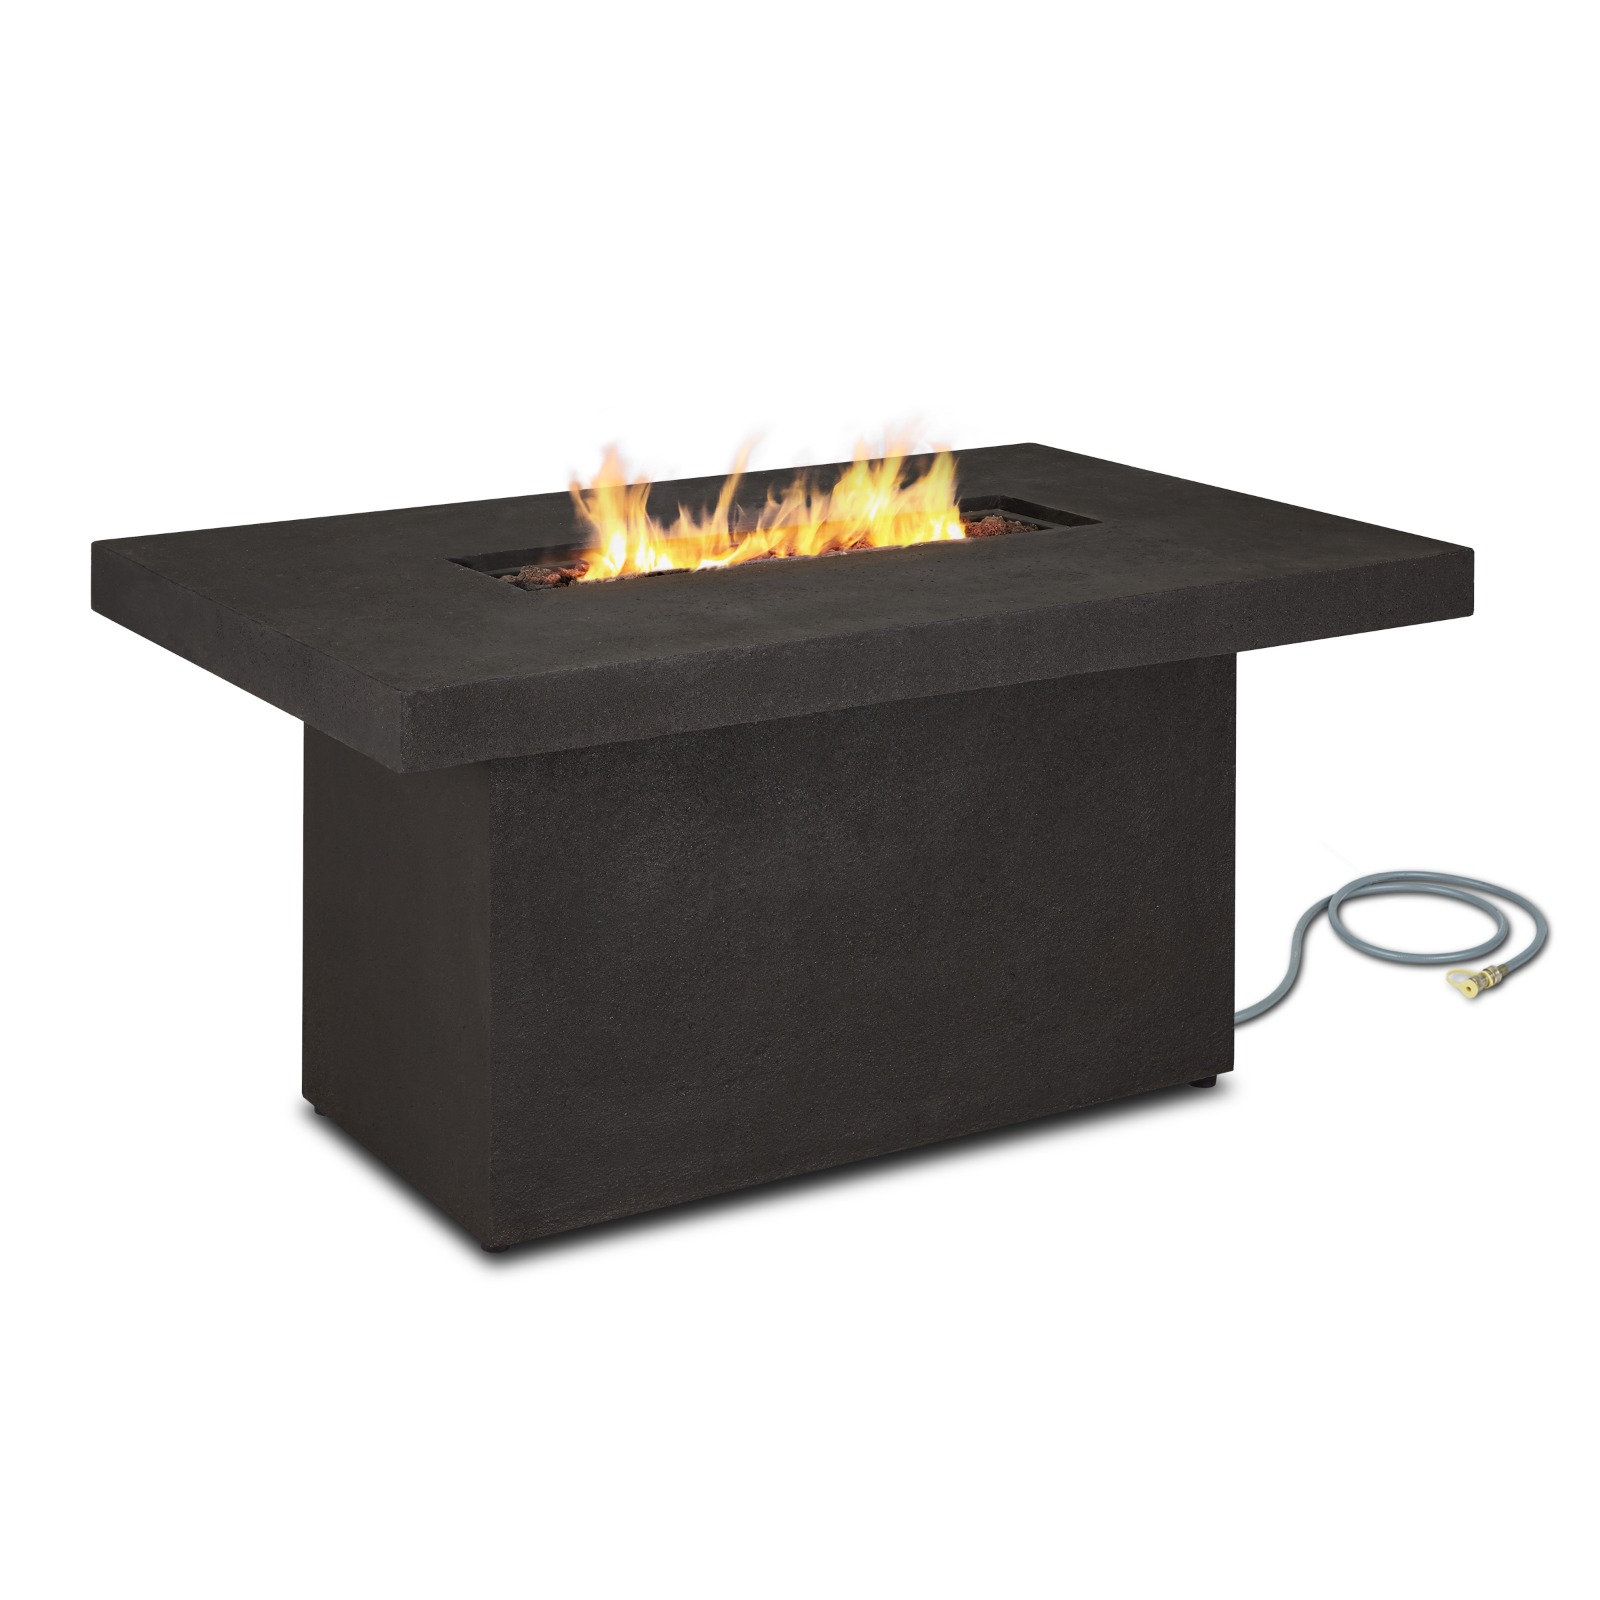 Ventura Outdoor Propane Fire Pit Fireplace Fire Table for Backyard or Patio with Natural Gas Conversion Kit